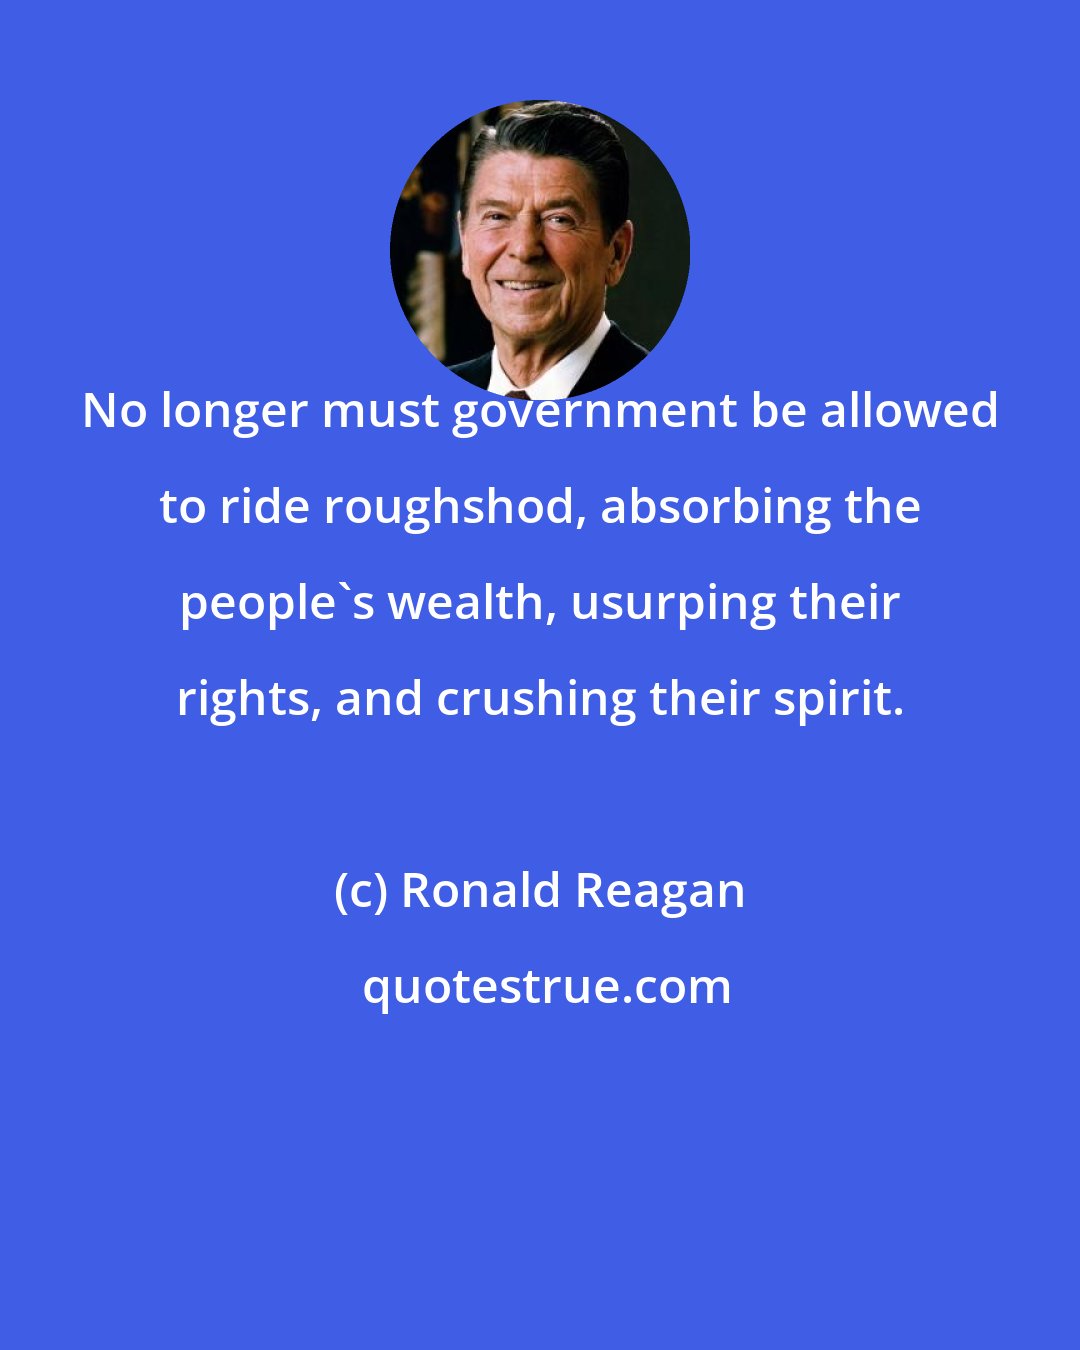 Ronald Reagan: No longer must government be allowed to ride roughshod, absorbing the people's wealth, usurping their rights, and crushing their spirit.